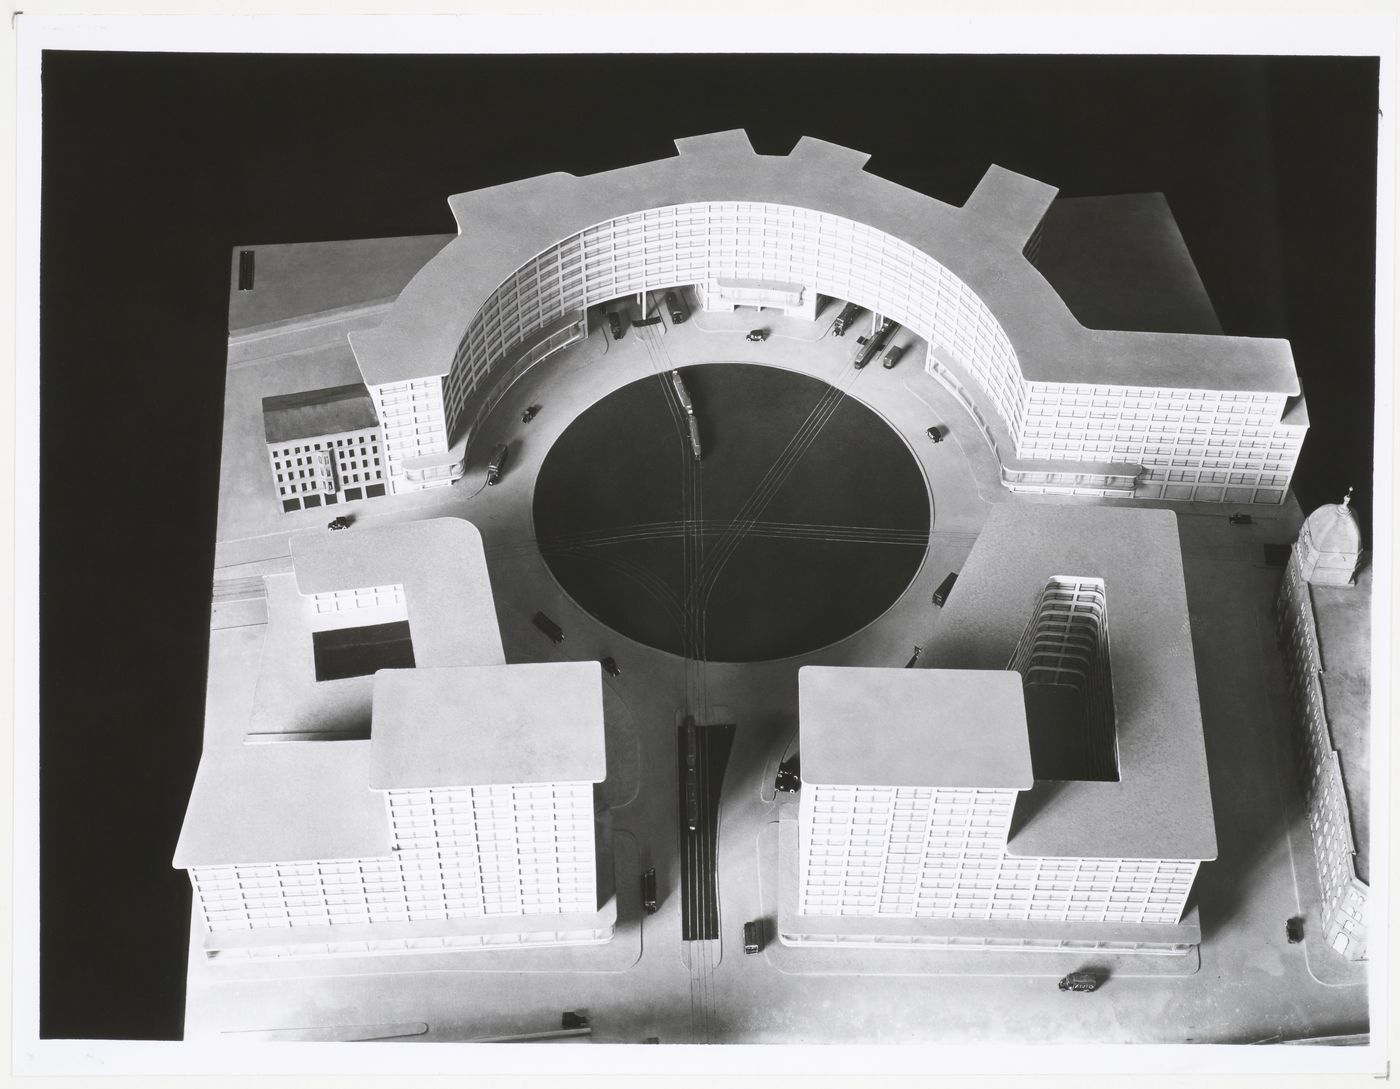 Photograph of a model by Martin Wagner for the Alexanderplatz competition, Berlin